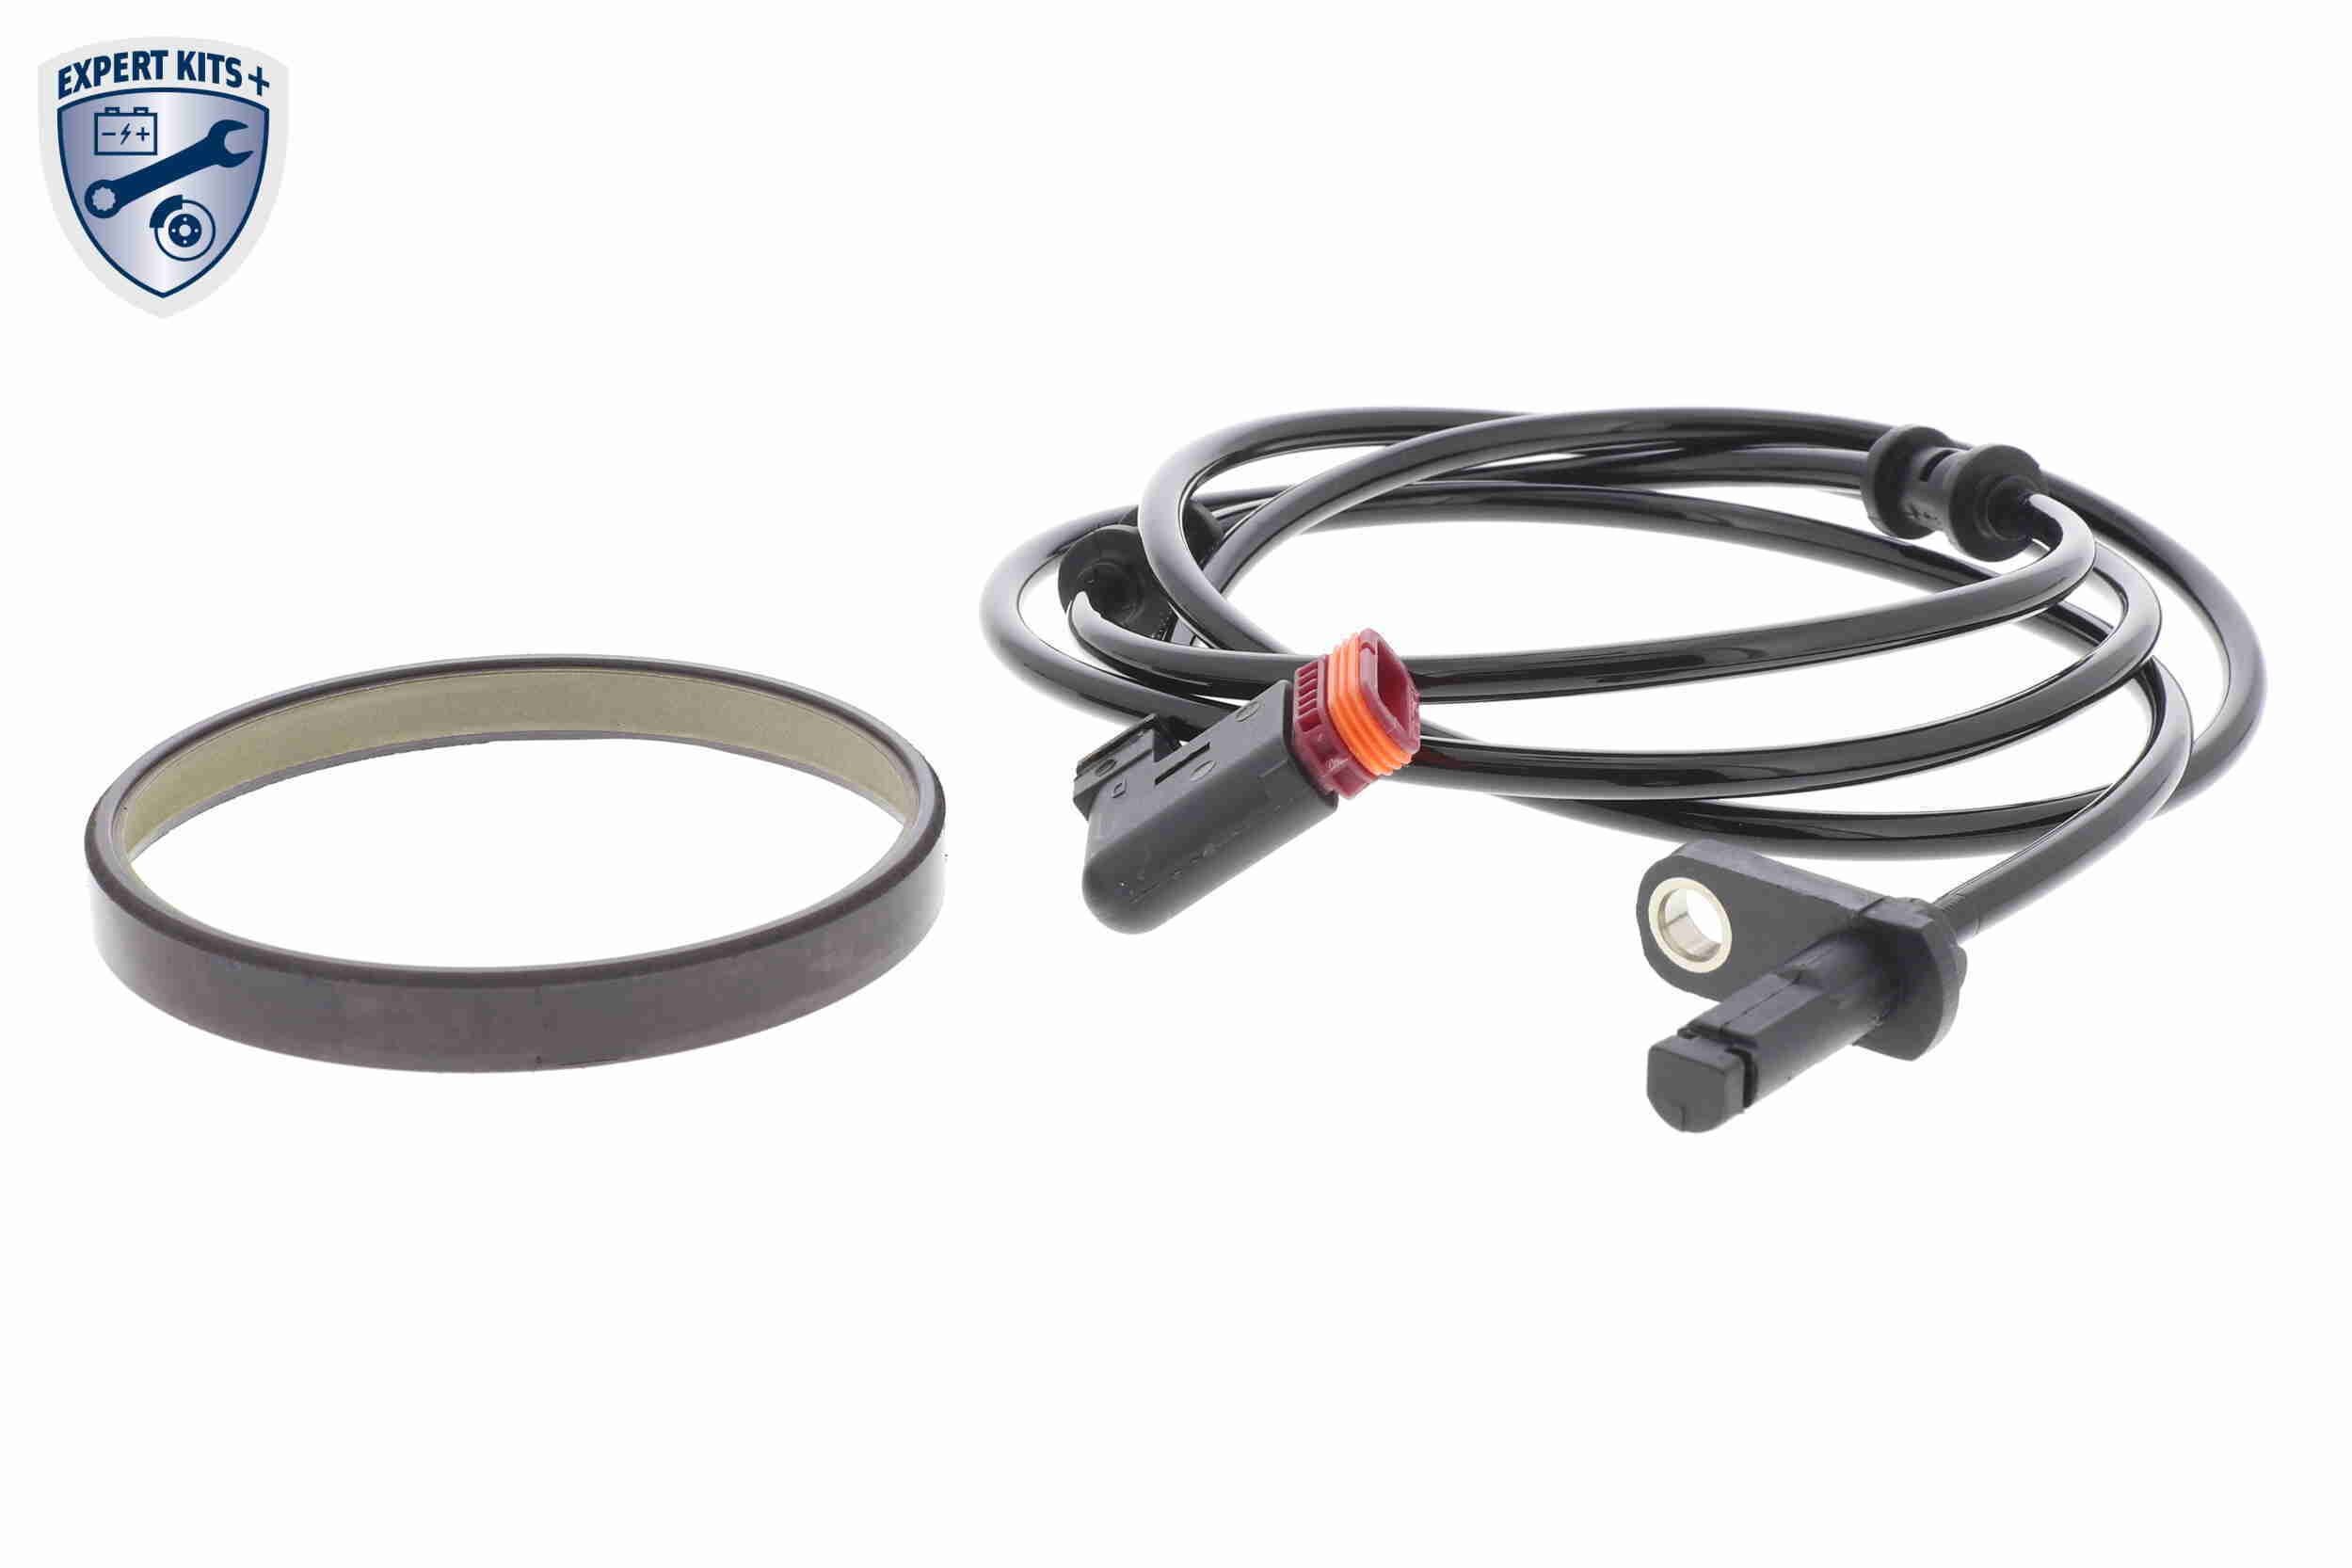 VEMO V30-72-7800 ABS sensor Rear Axle, with ABS sensor ring, Inductive Sensor, 2-pin connector, 1455mm, 12V, oval